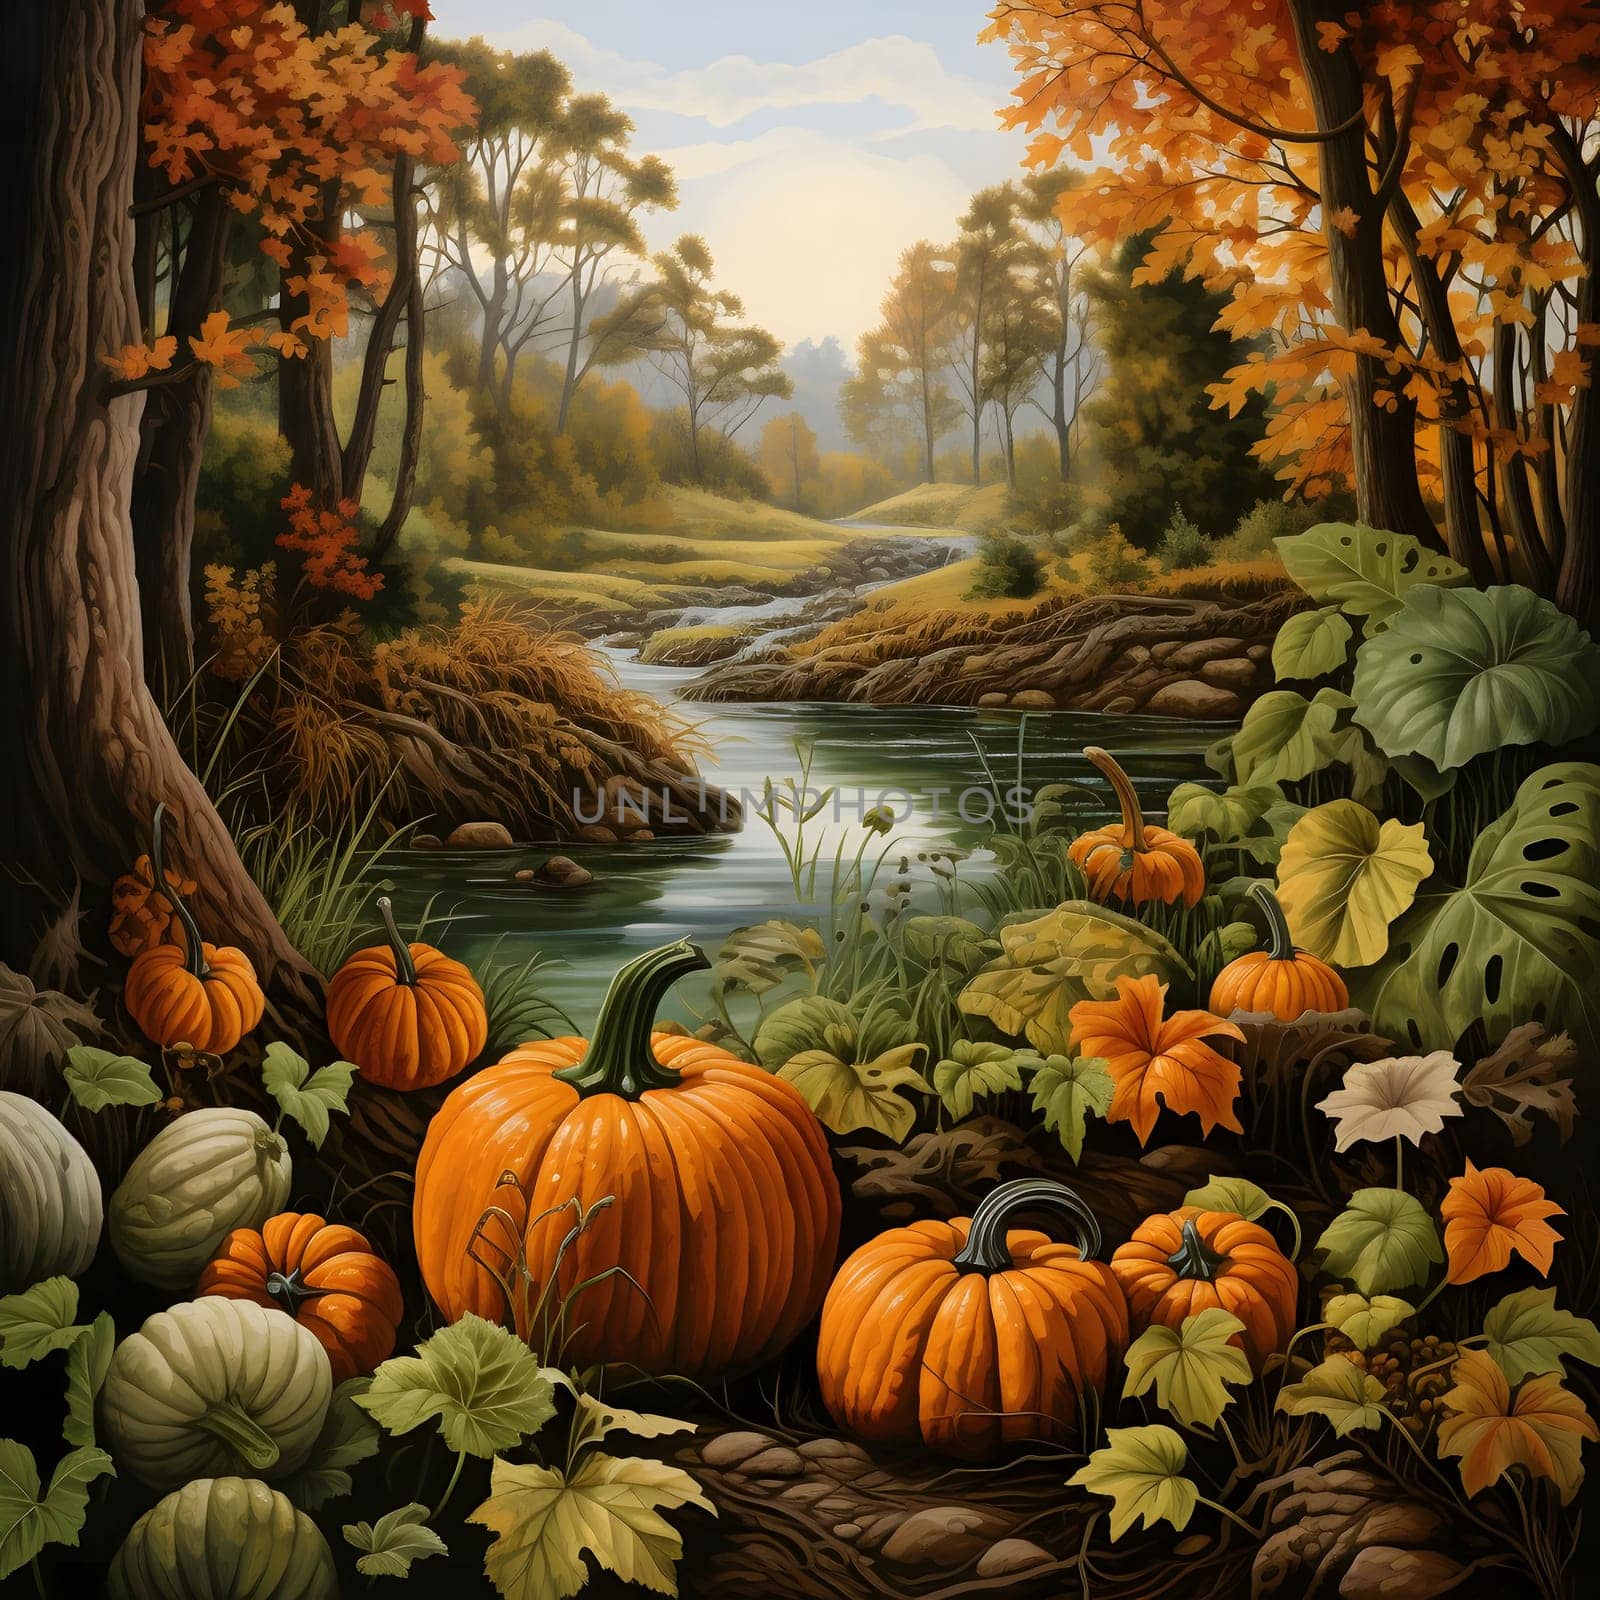 Illustration, leaves, colorful pumpkins, stream flowing in the forest, autumn. Pumpkin as a dish of thanksgiving for the harvest. An atmosphere of joy and celebration.